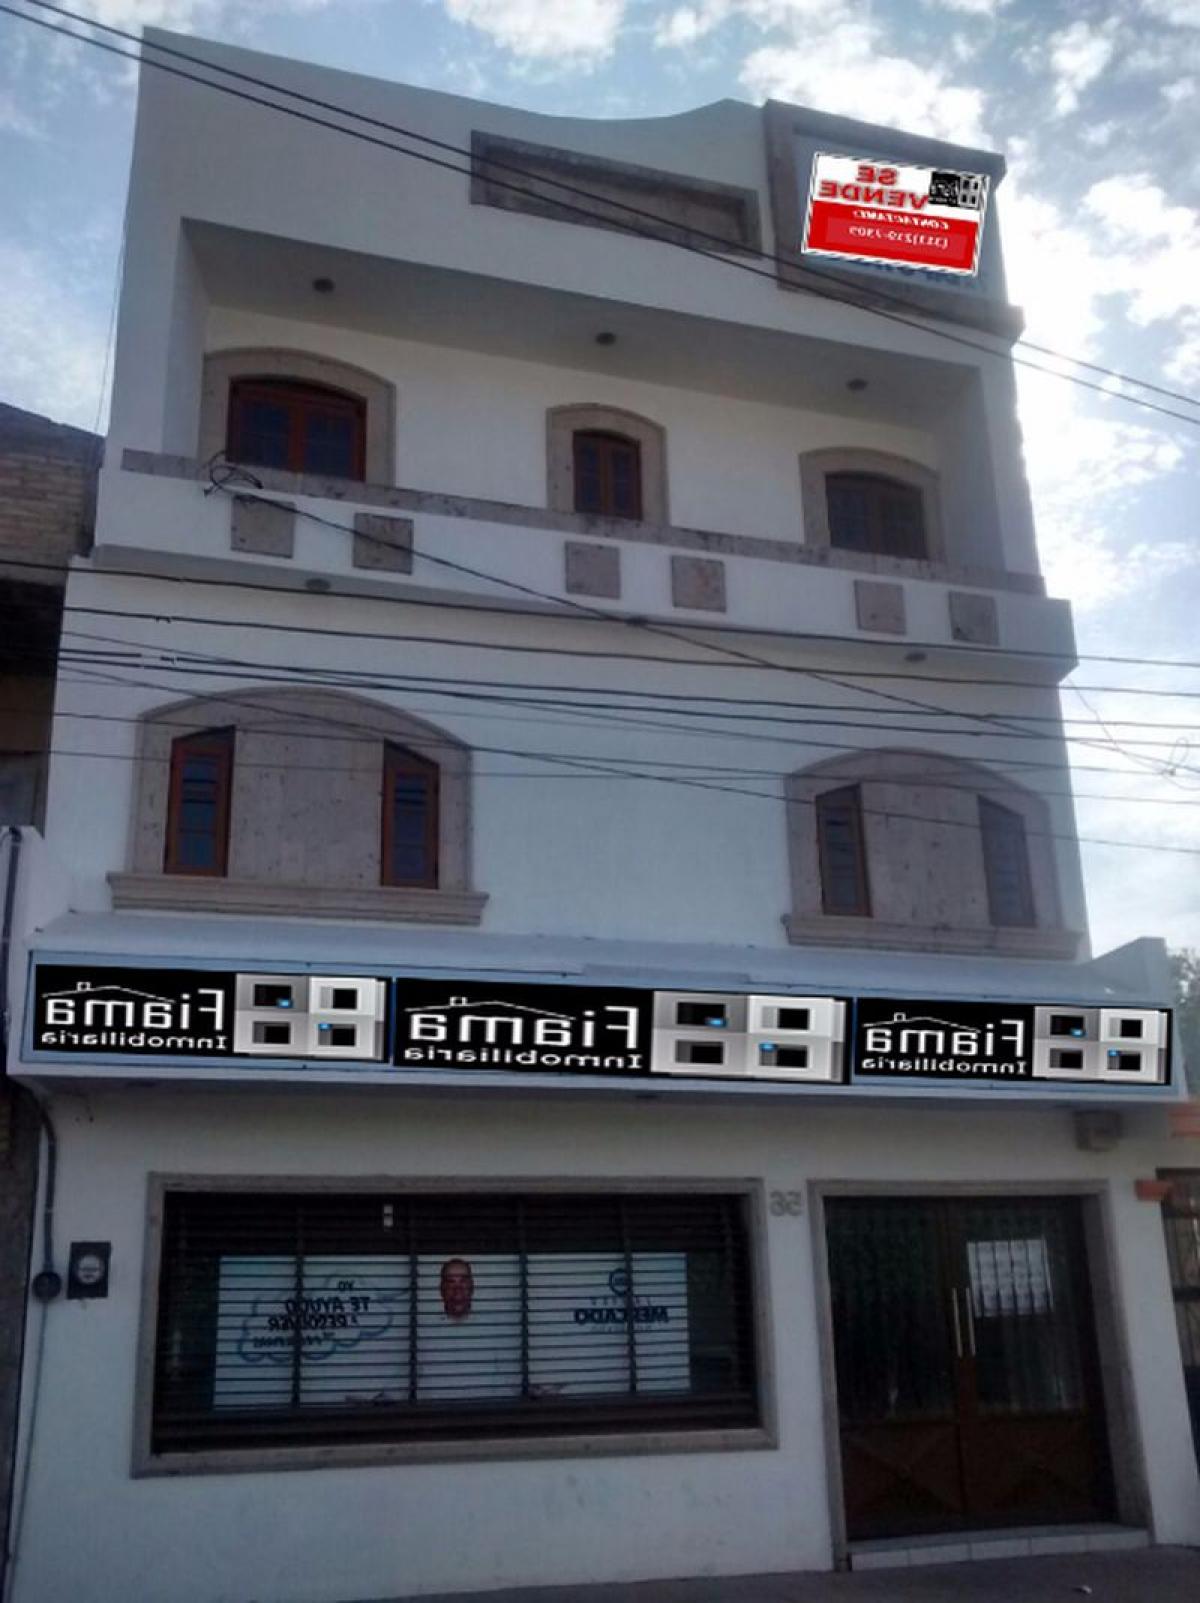 Picture of Apartment Building For Sale in Nayarit, Nayarit, Mexico